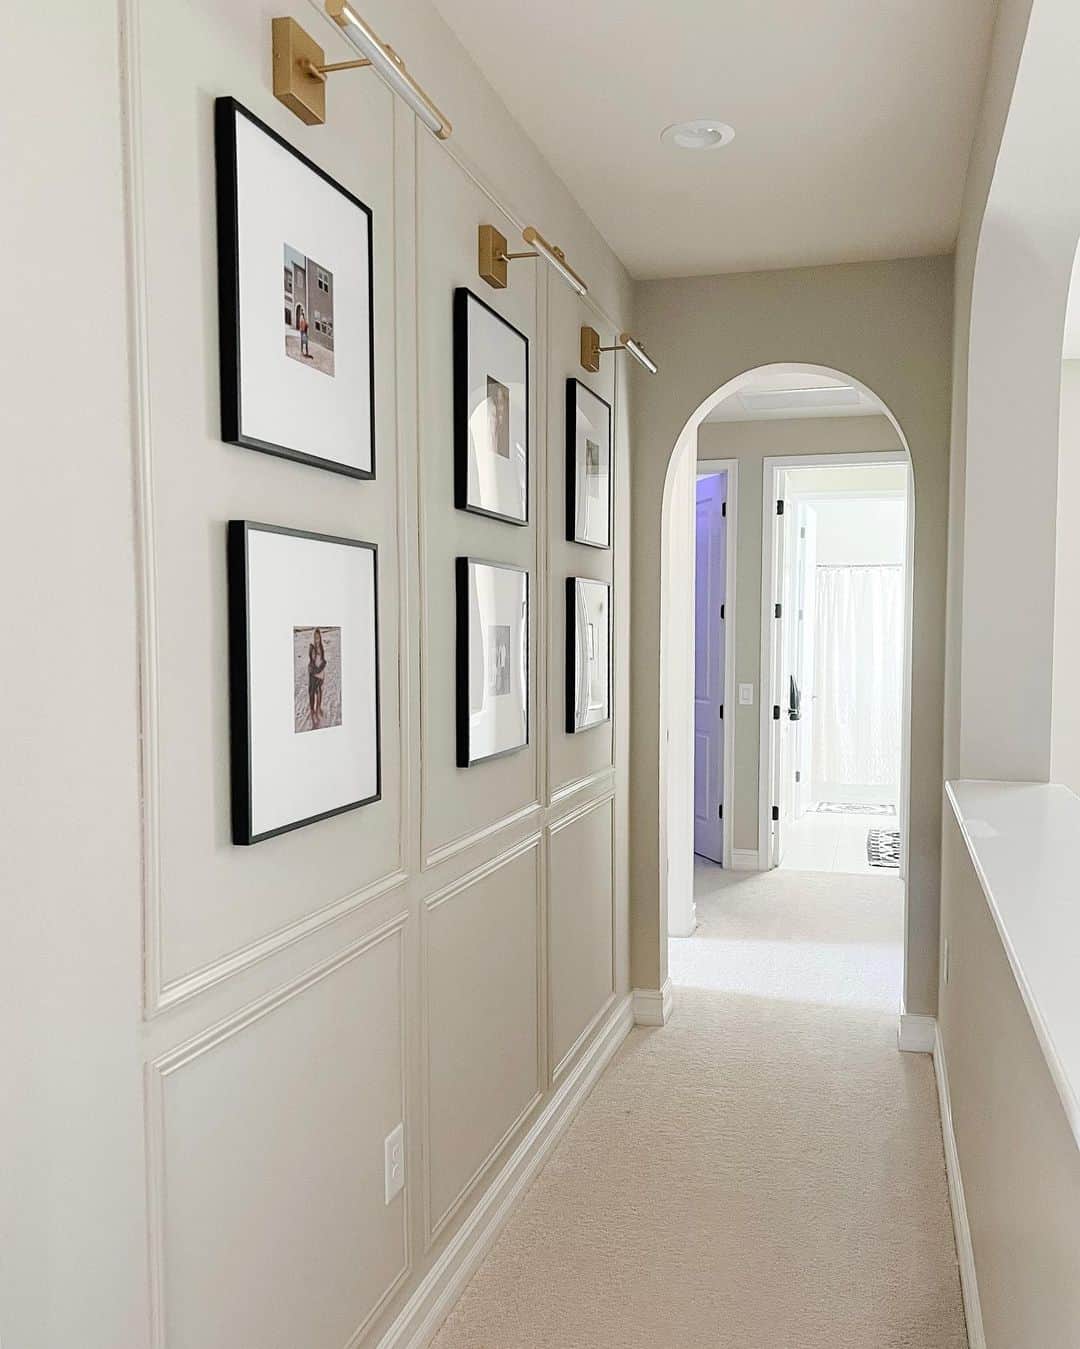 30 Hallway Light Fixtures: variety of luminous fixtures that guarantee to stylishly brighten up your corridors. Discover modern, traditional, and whimsical lighting ideas to elevate your hallway decor. Because it's not just a passage, it's part of your home.